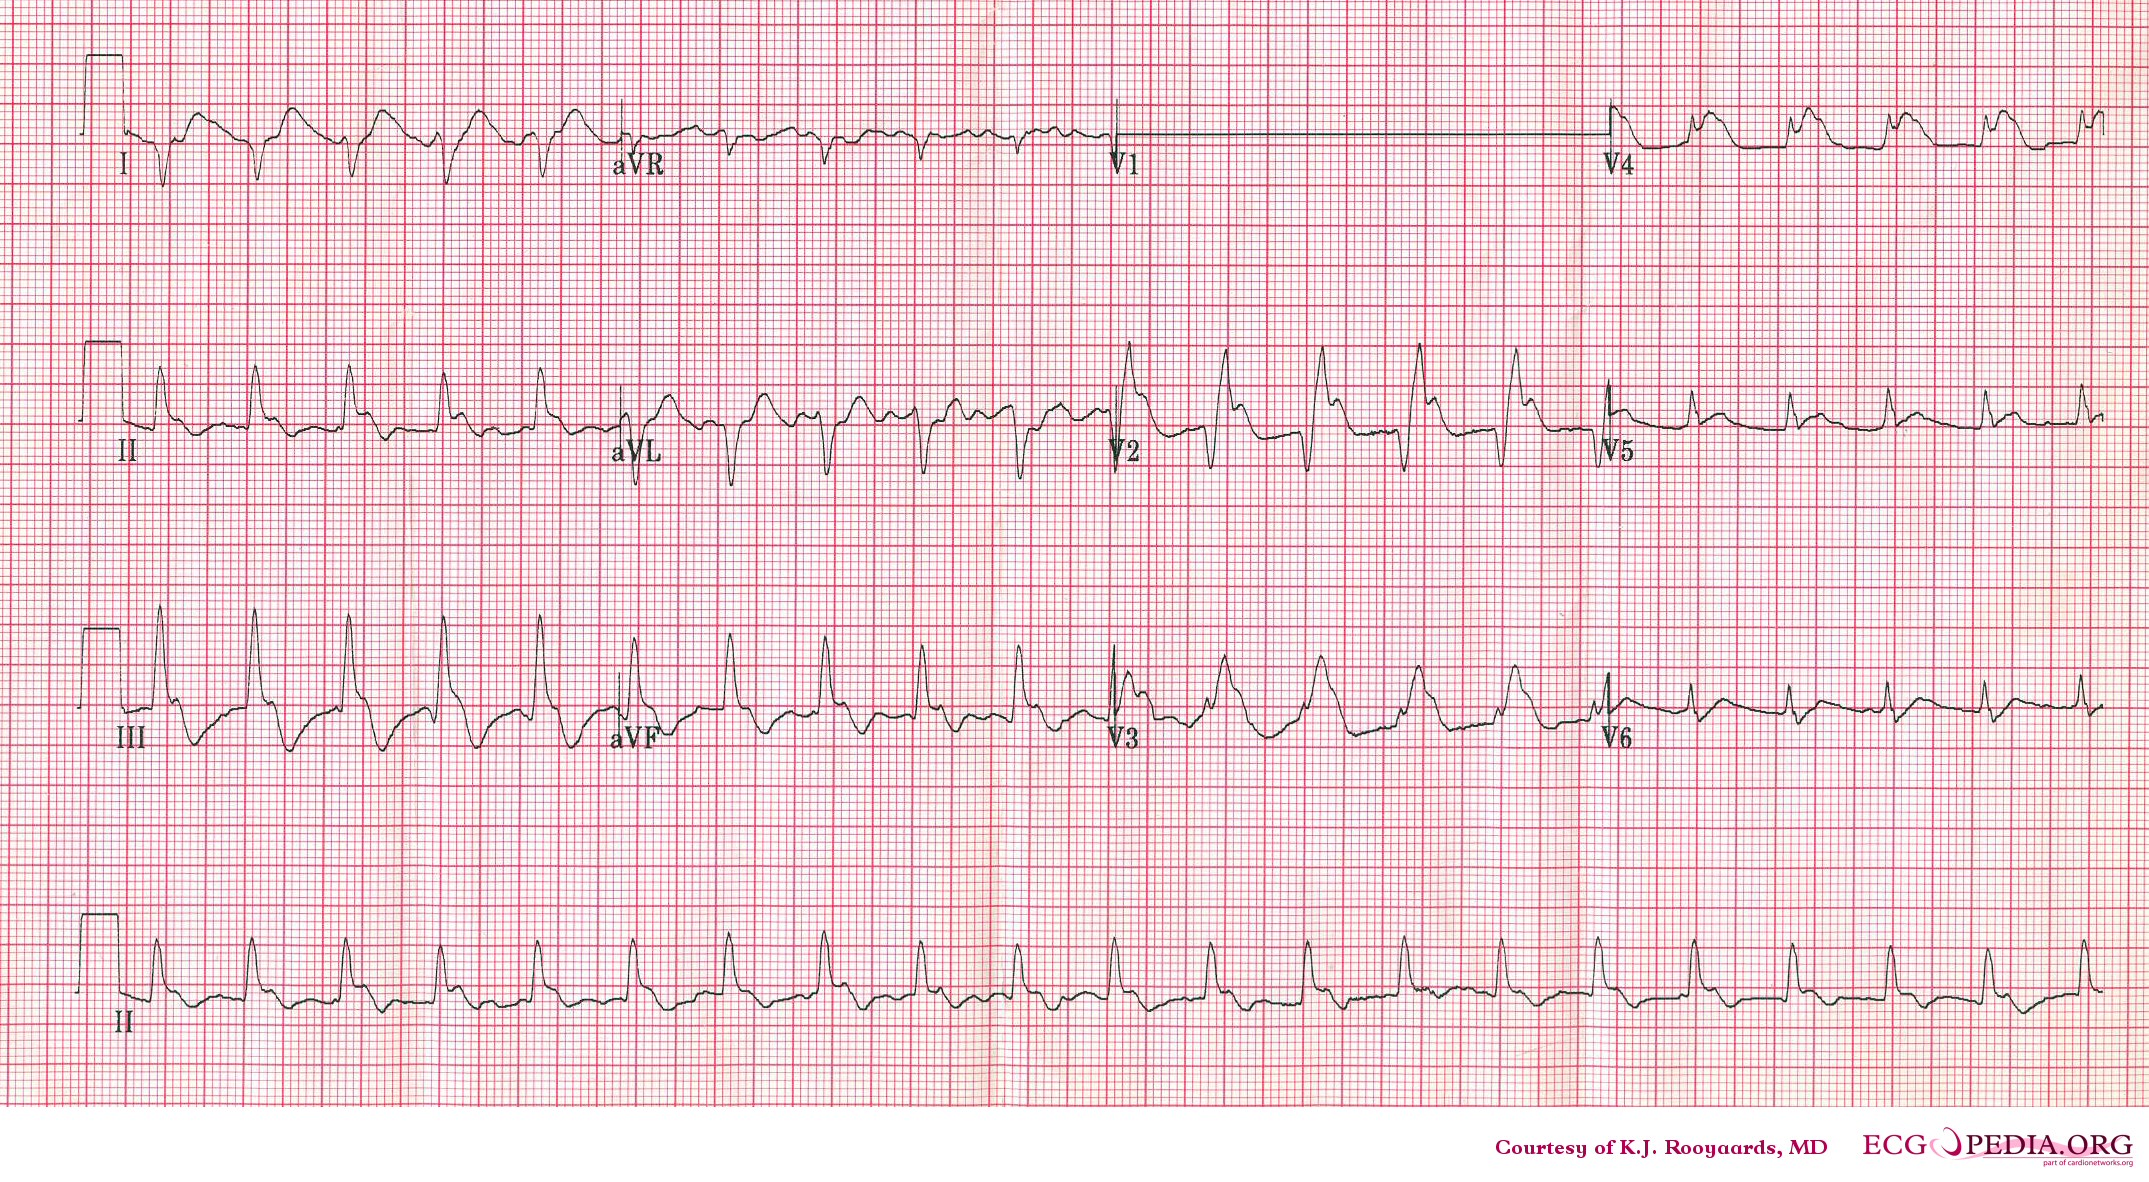 Another example; a patient with pulmonary embolism. Note the tachycardia and right axis.Image courtesy of ecgpedia